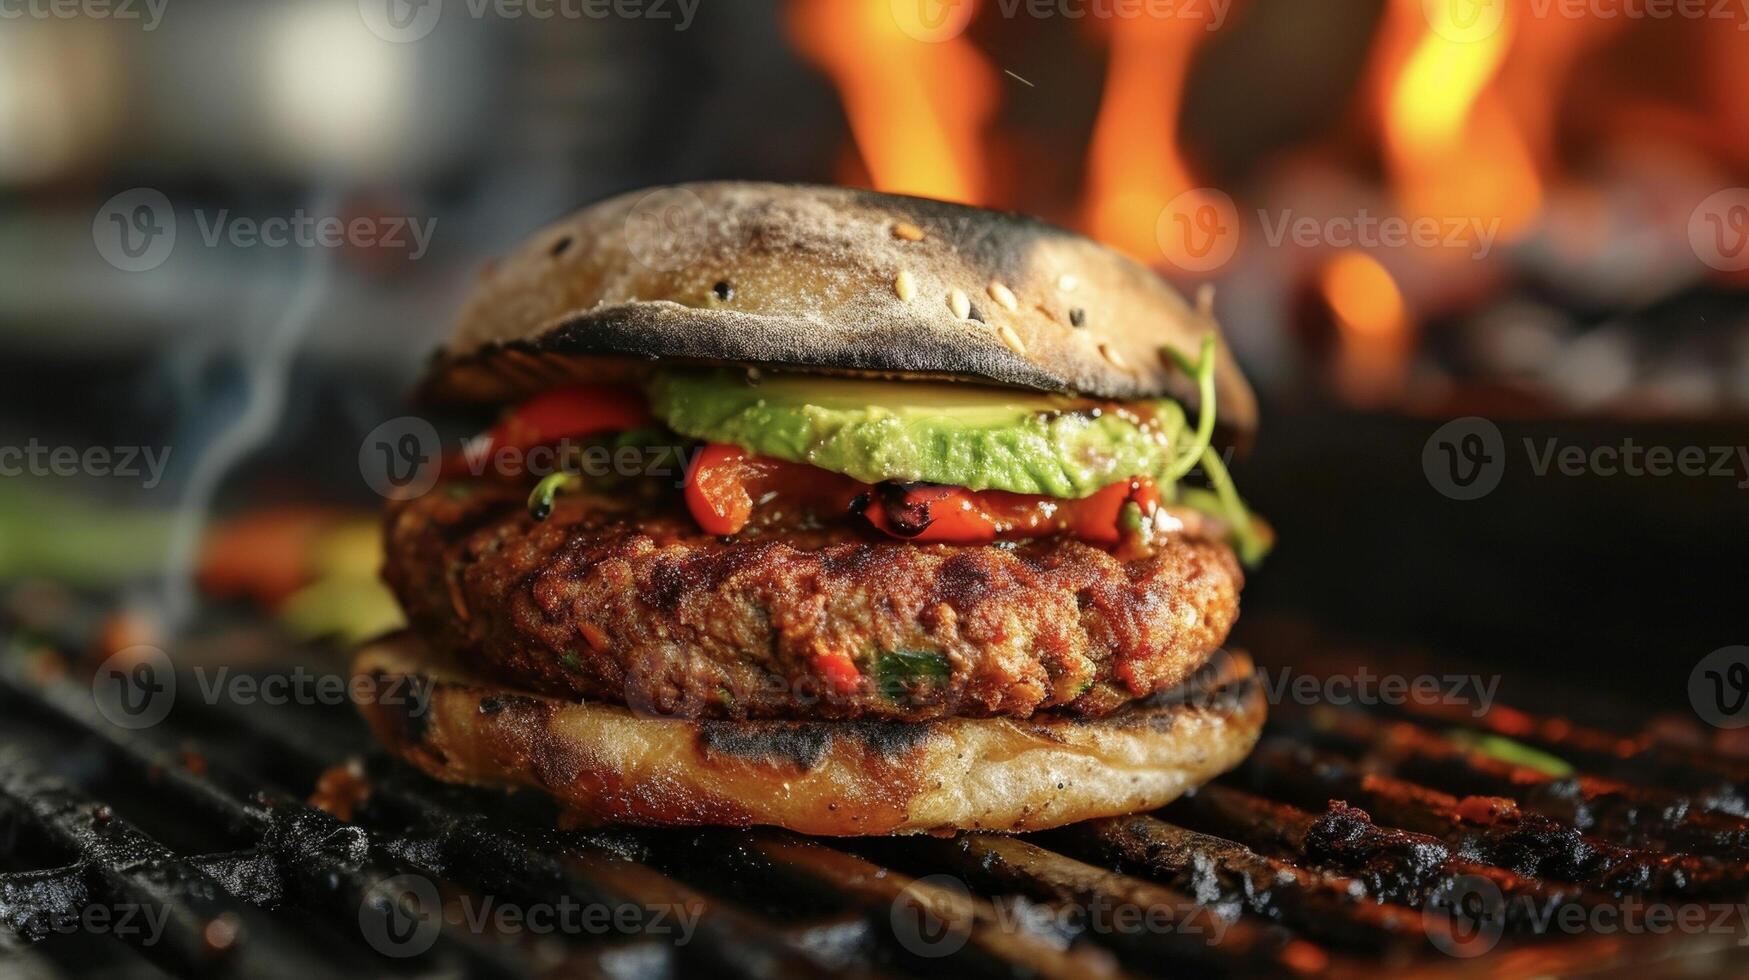 A plantbased patty sizzles on the grill exuding a smoky aroma as it cooks to perfection. Served on a flamegrilled whole wheat bun it is topped with avocado roasted bell pepper photo